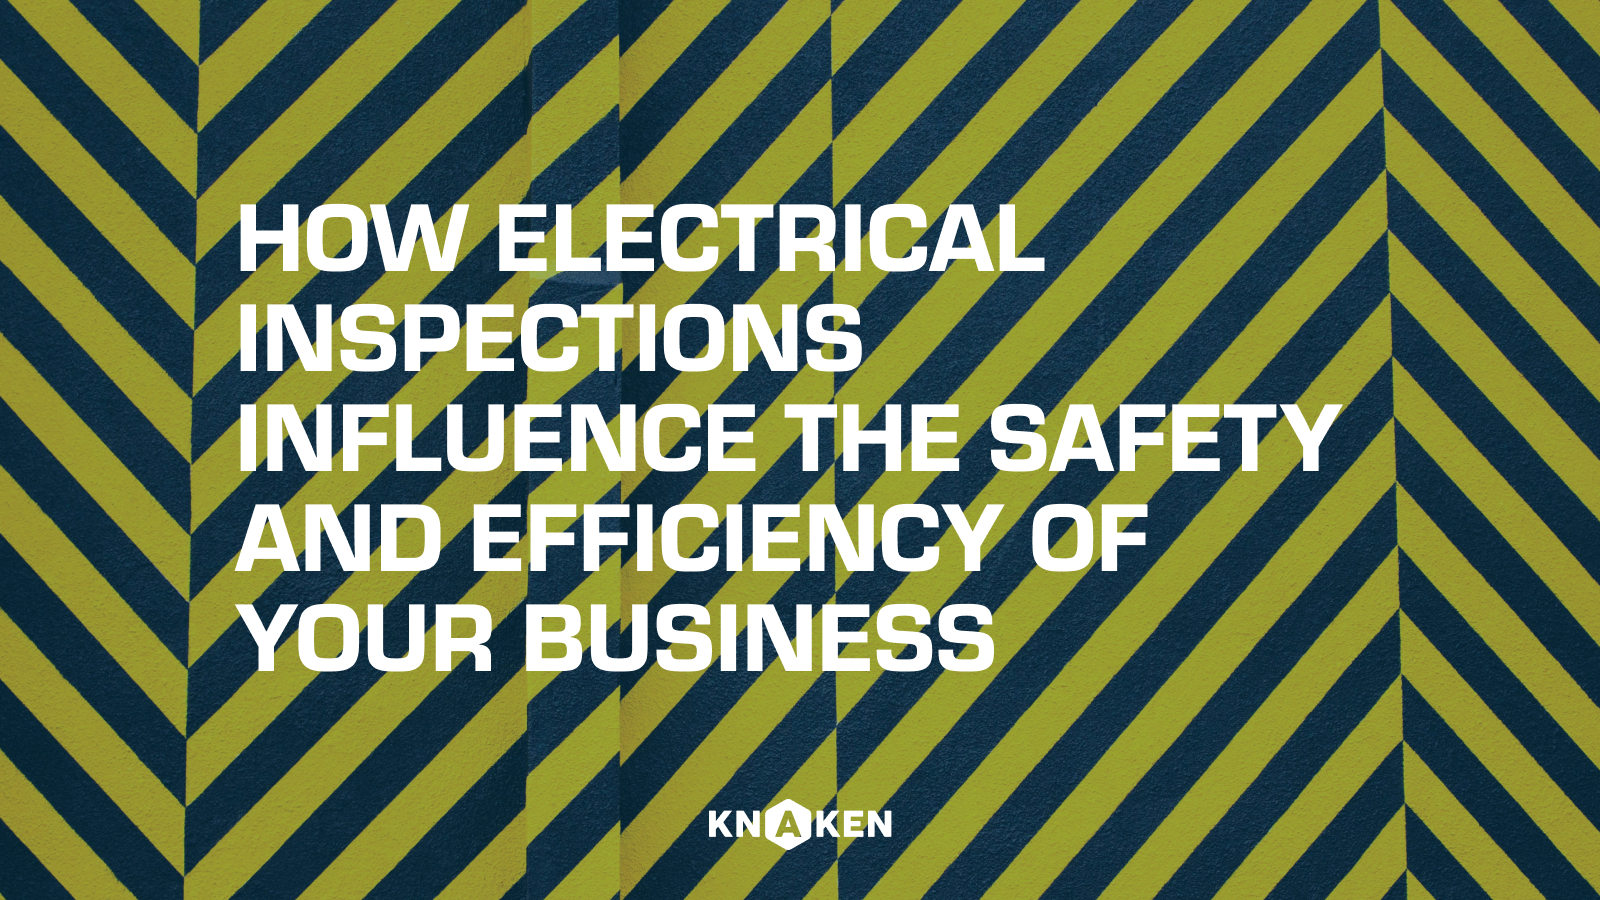 How Electrical Inspections Influence the Safety and Efficiency of Your Business